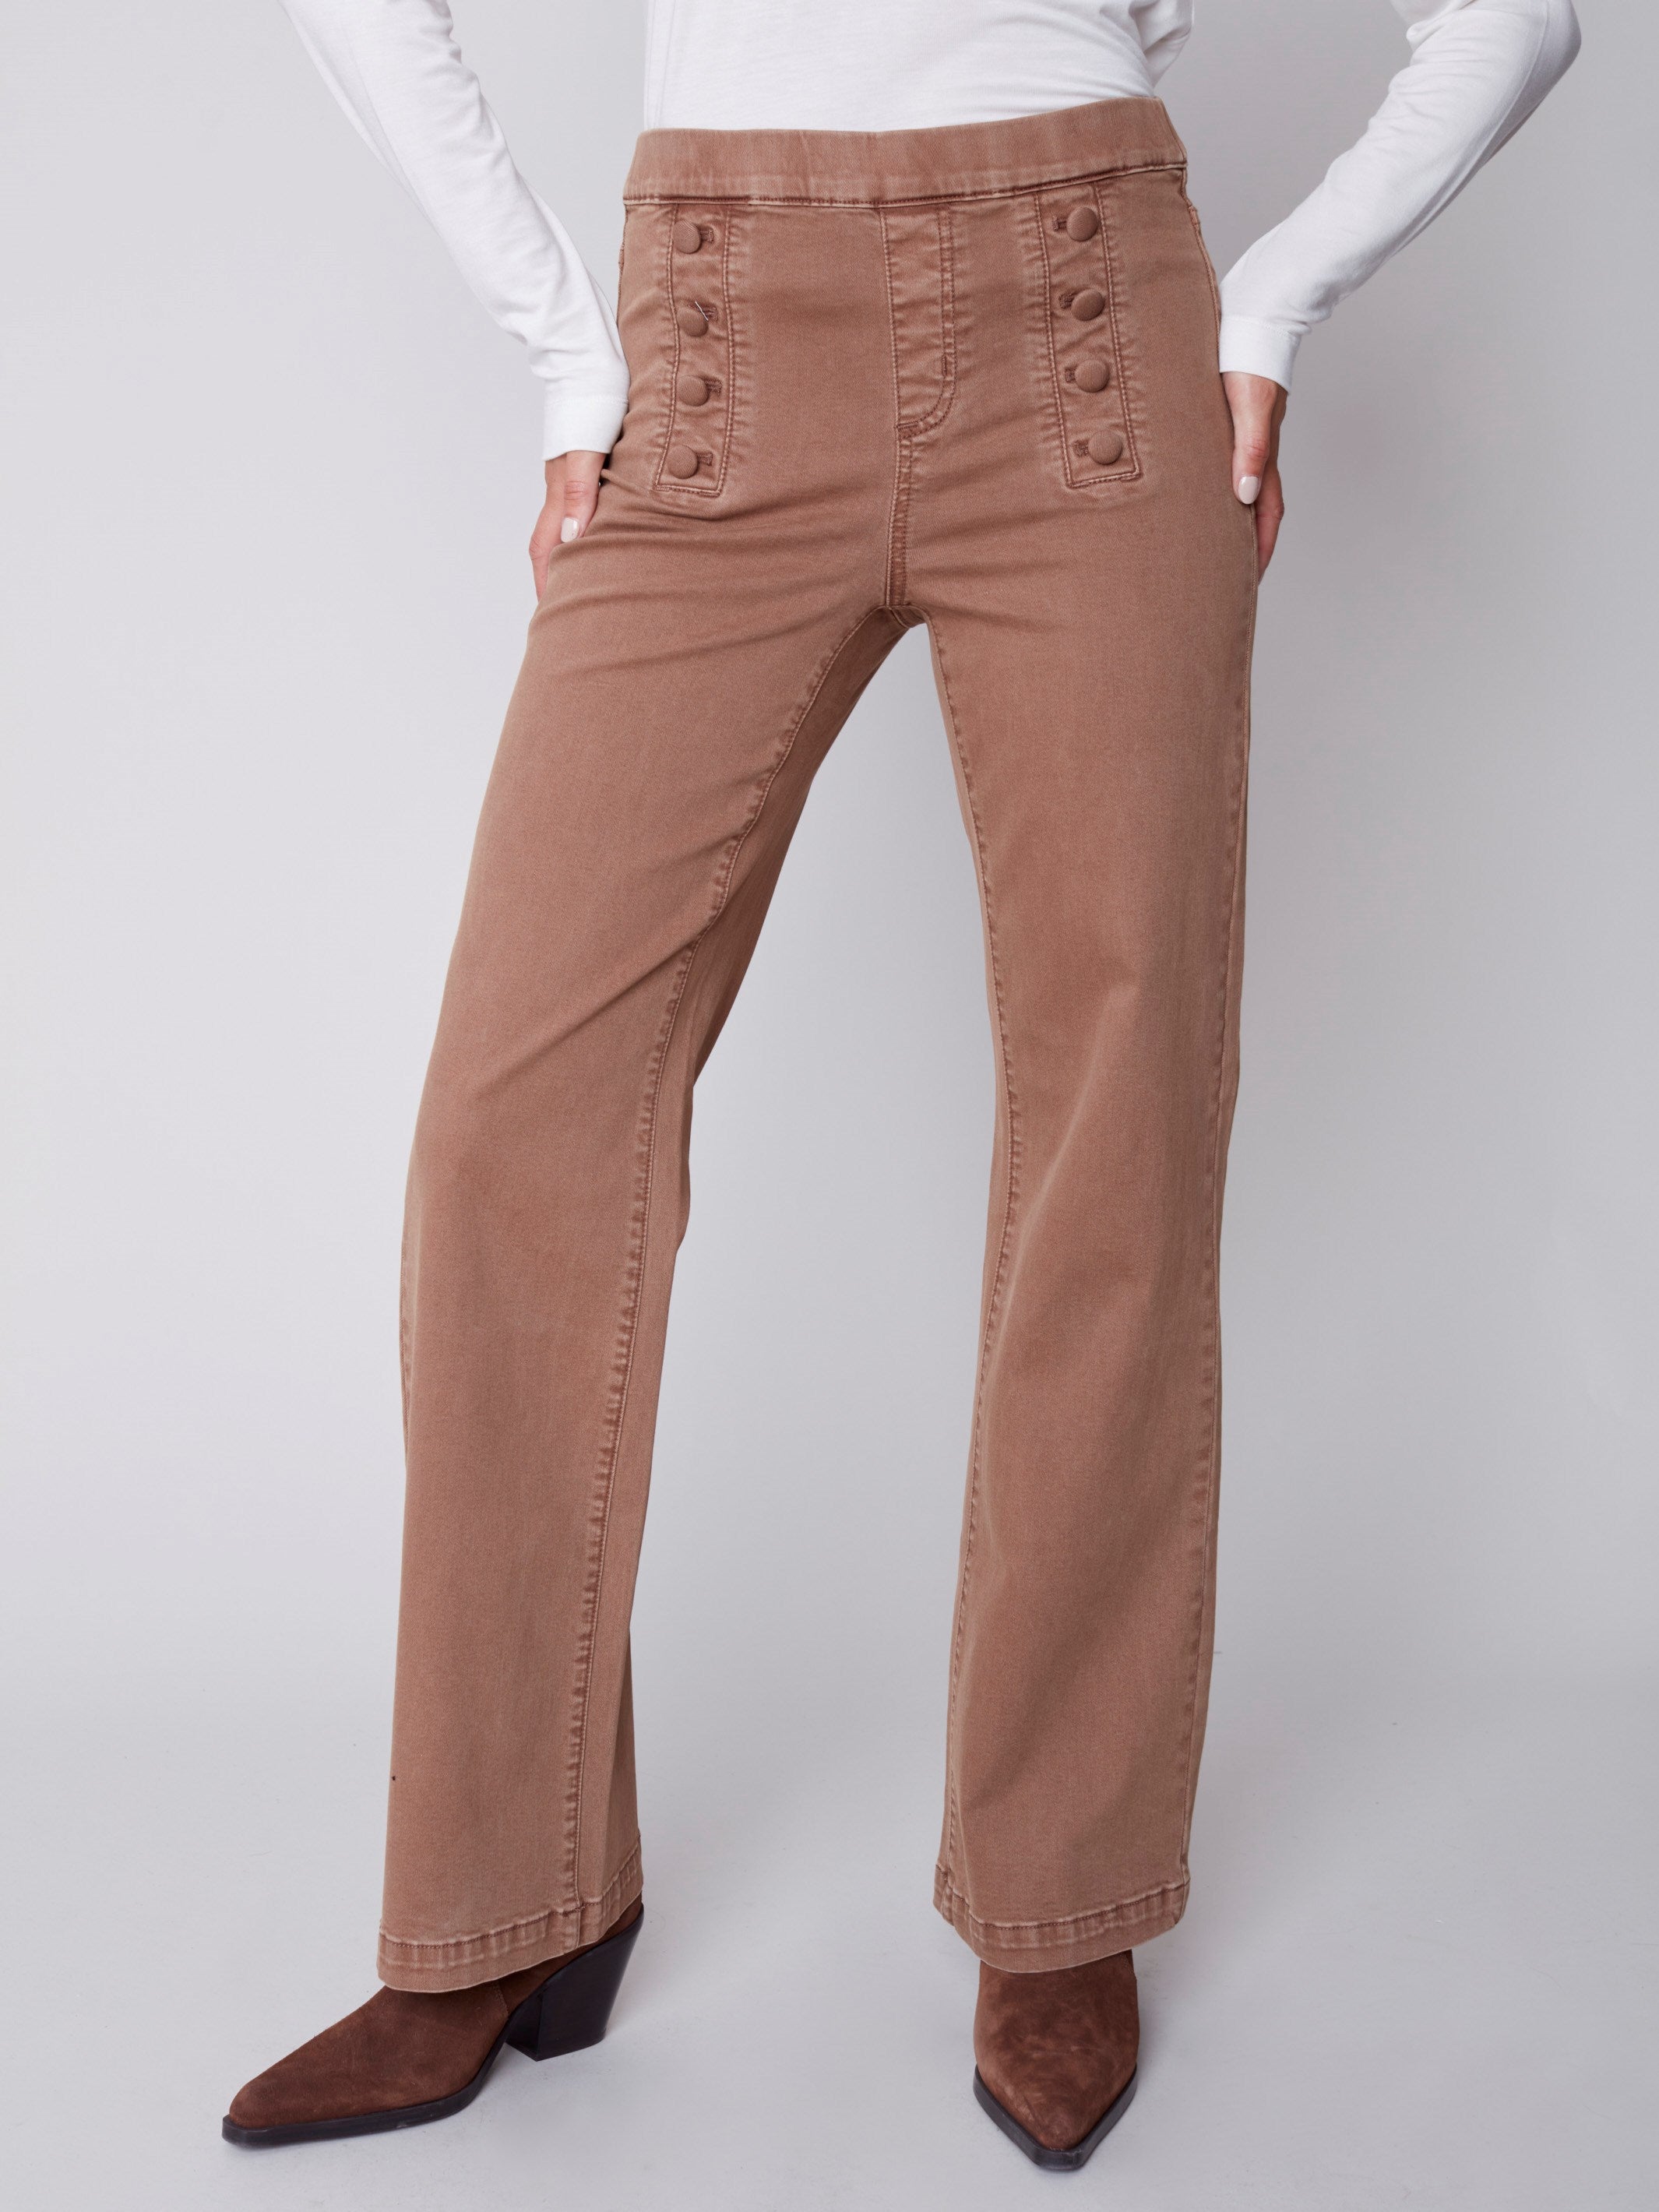 Flare Pull-on Jeans with Decorative Buttons - Truffle